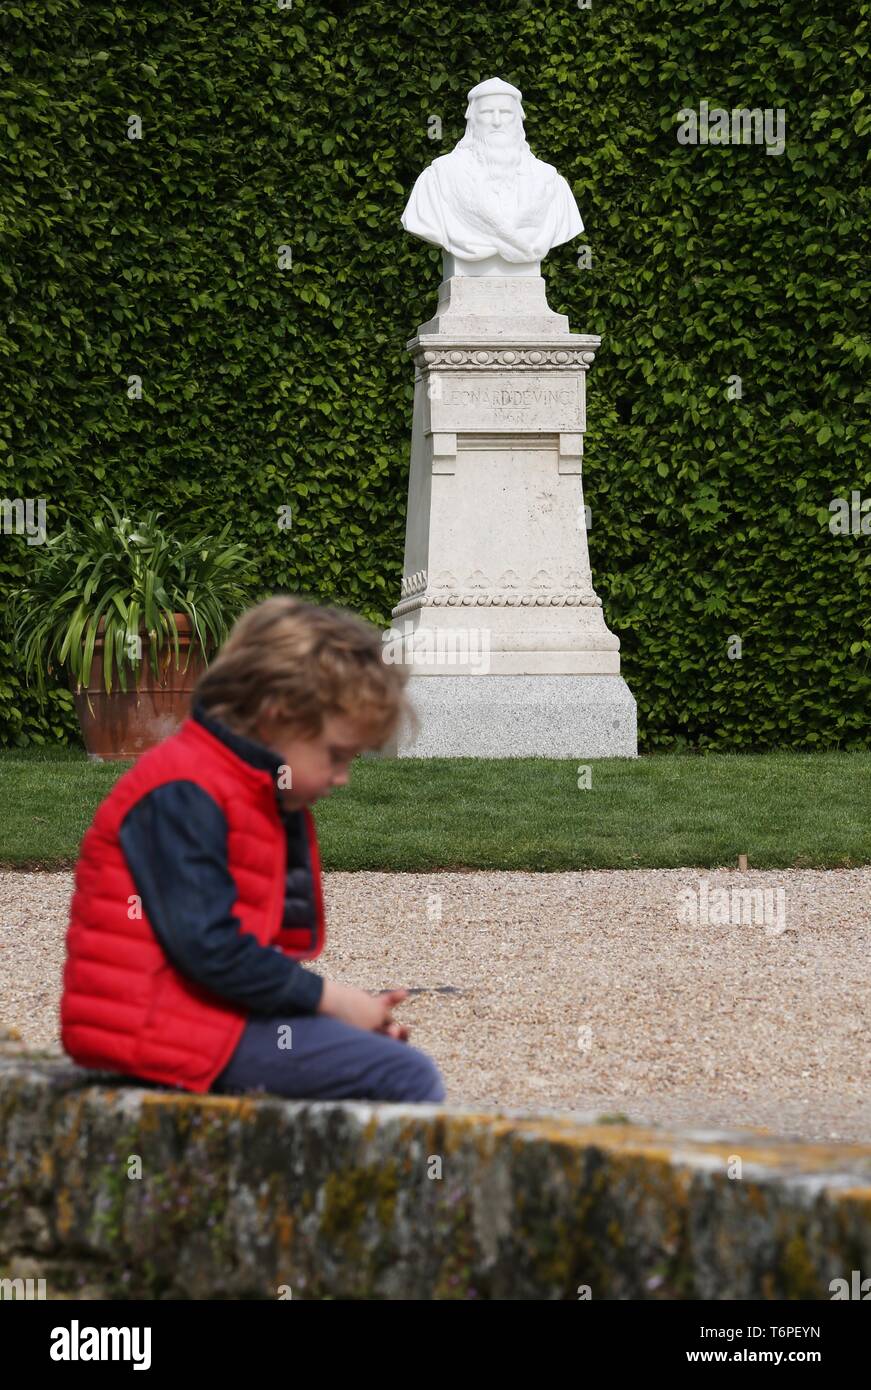 Paris, France. 1st May, 2019. A child is seen beside a sculpture of Leonardo da Vinci at the Chateau d'Amboise in Amboise, France, May 1, 2019. Thursday marks the 500th anniversary of the death of Renaissance master Leonardo da Vinci. The famed painter, sculptor, writer, inventor, scientist and mathematician spent his last three years in Amboise as a guest of France's King Francis I. Credit: Gao Jing/Xinhua/Alamy Live News Stock Photo